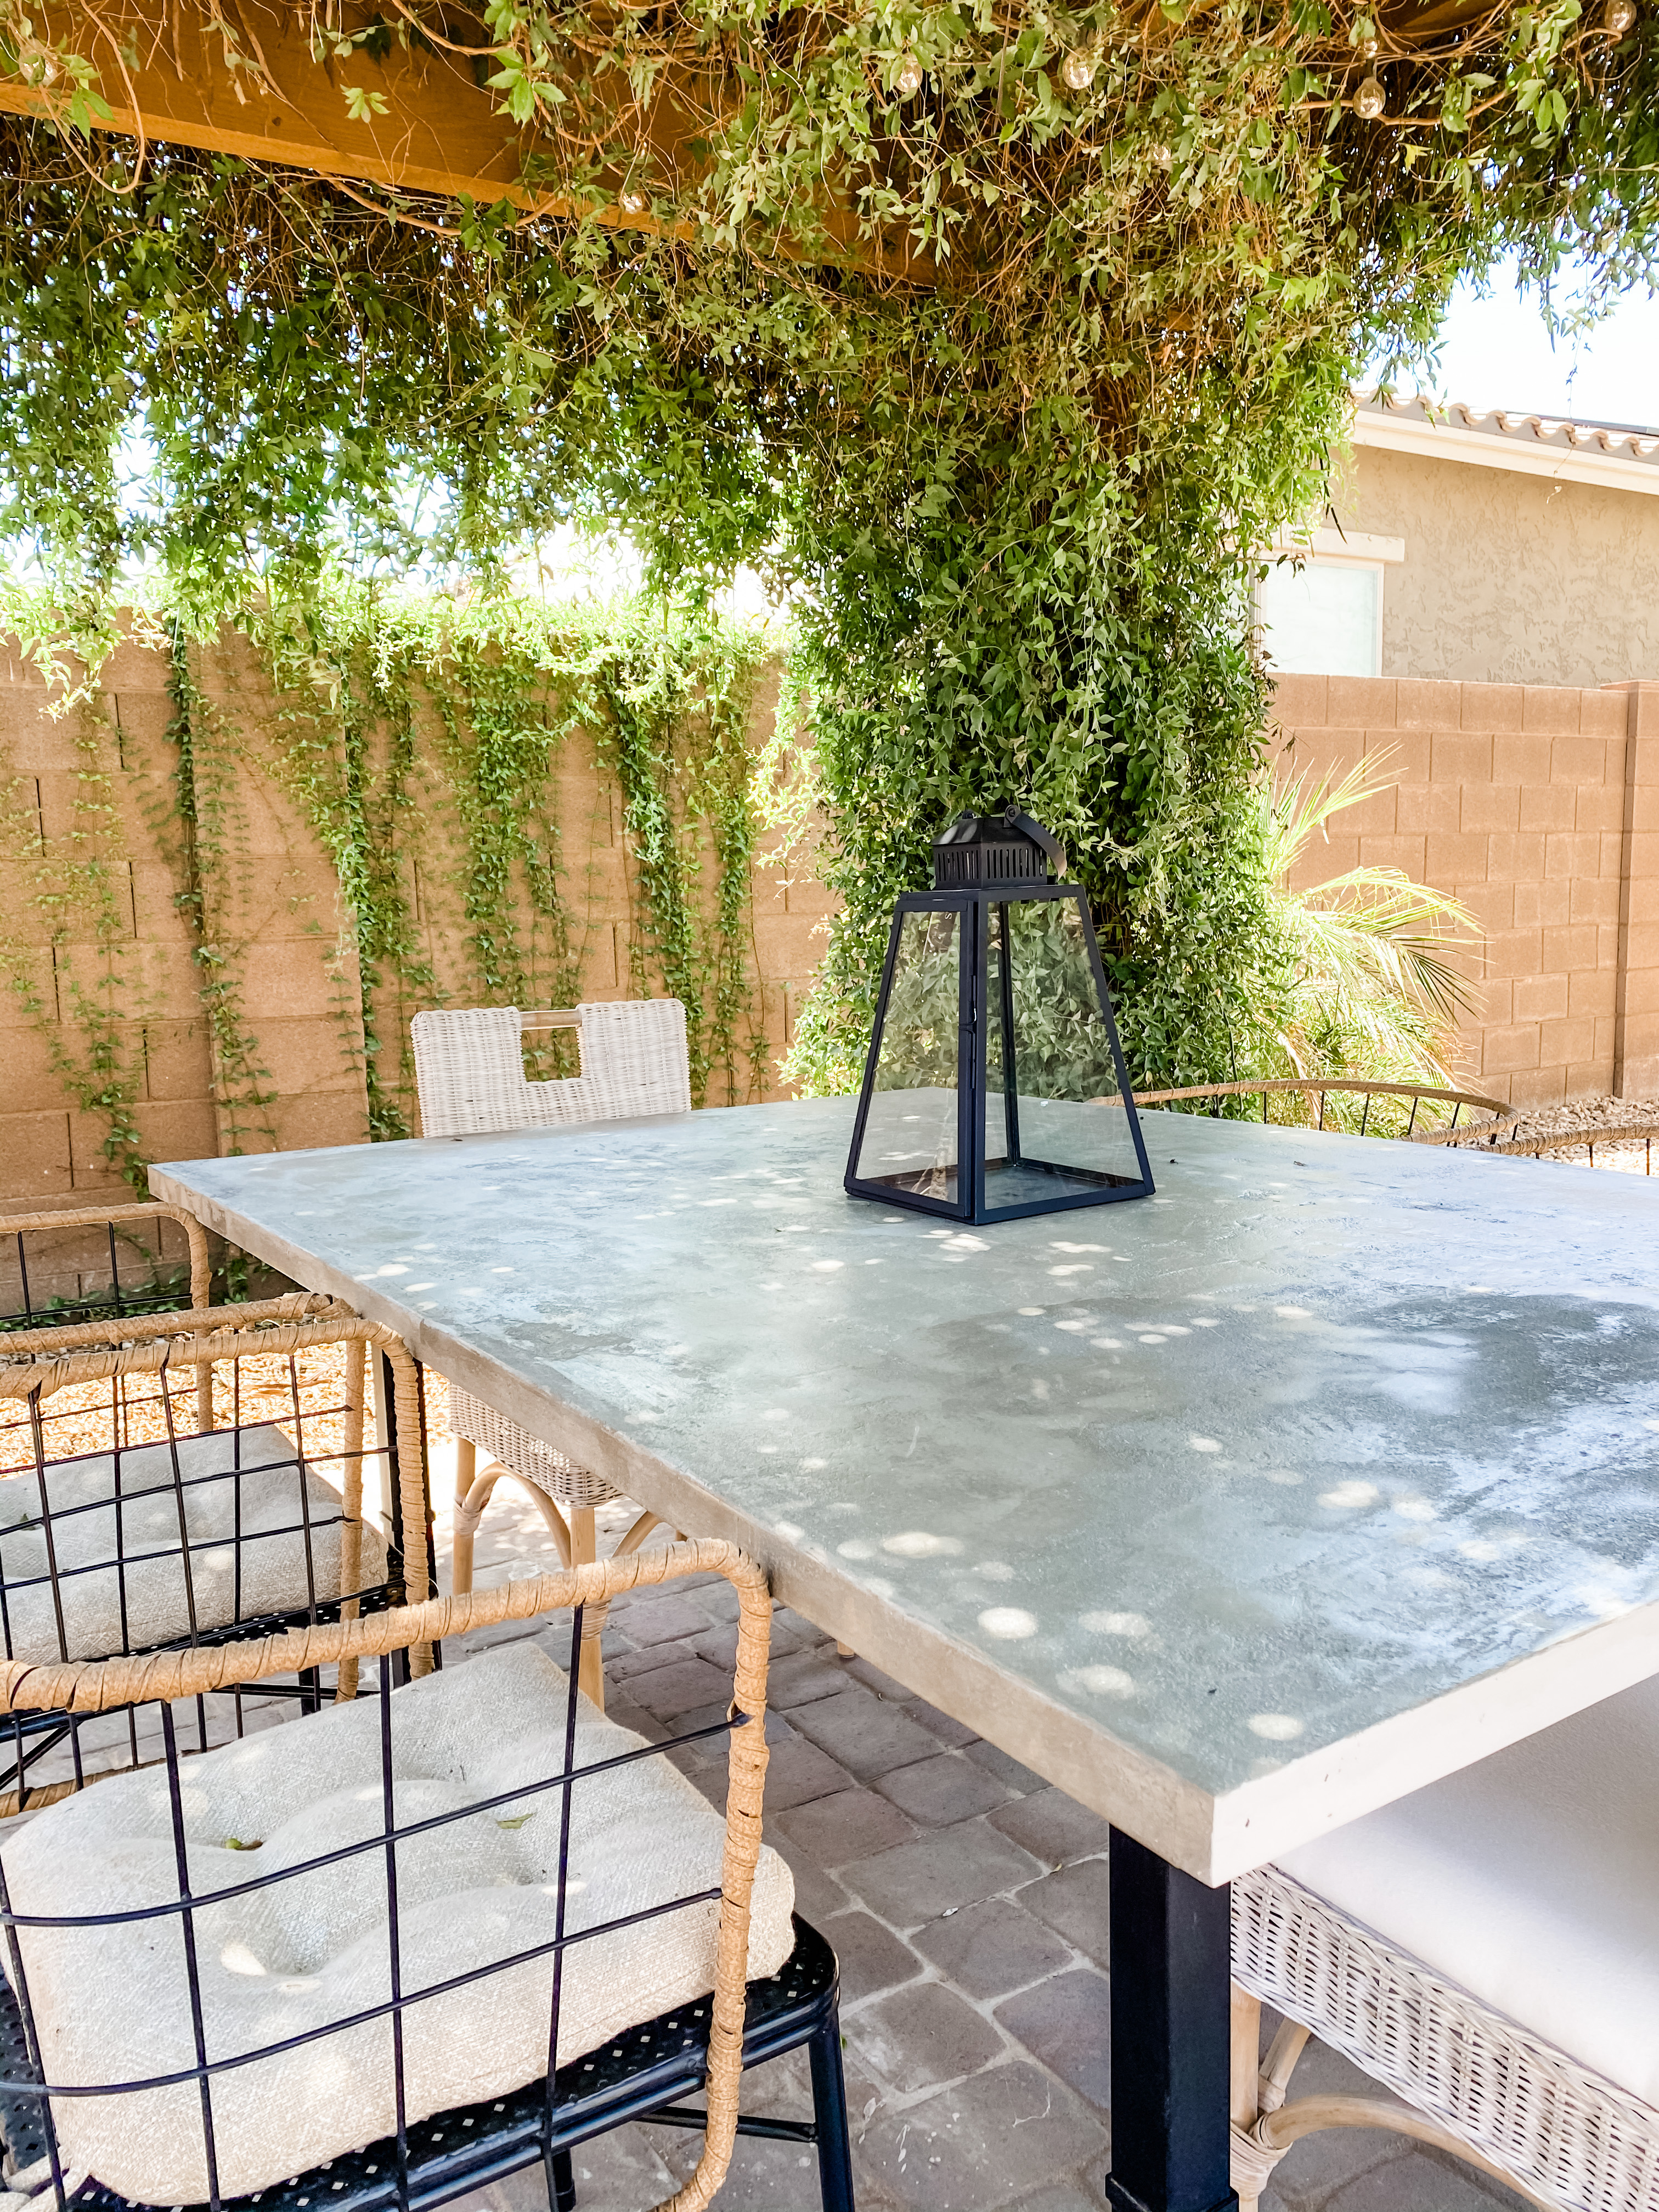 outdoor dining area with pergola cover